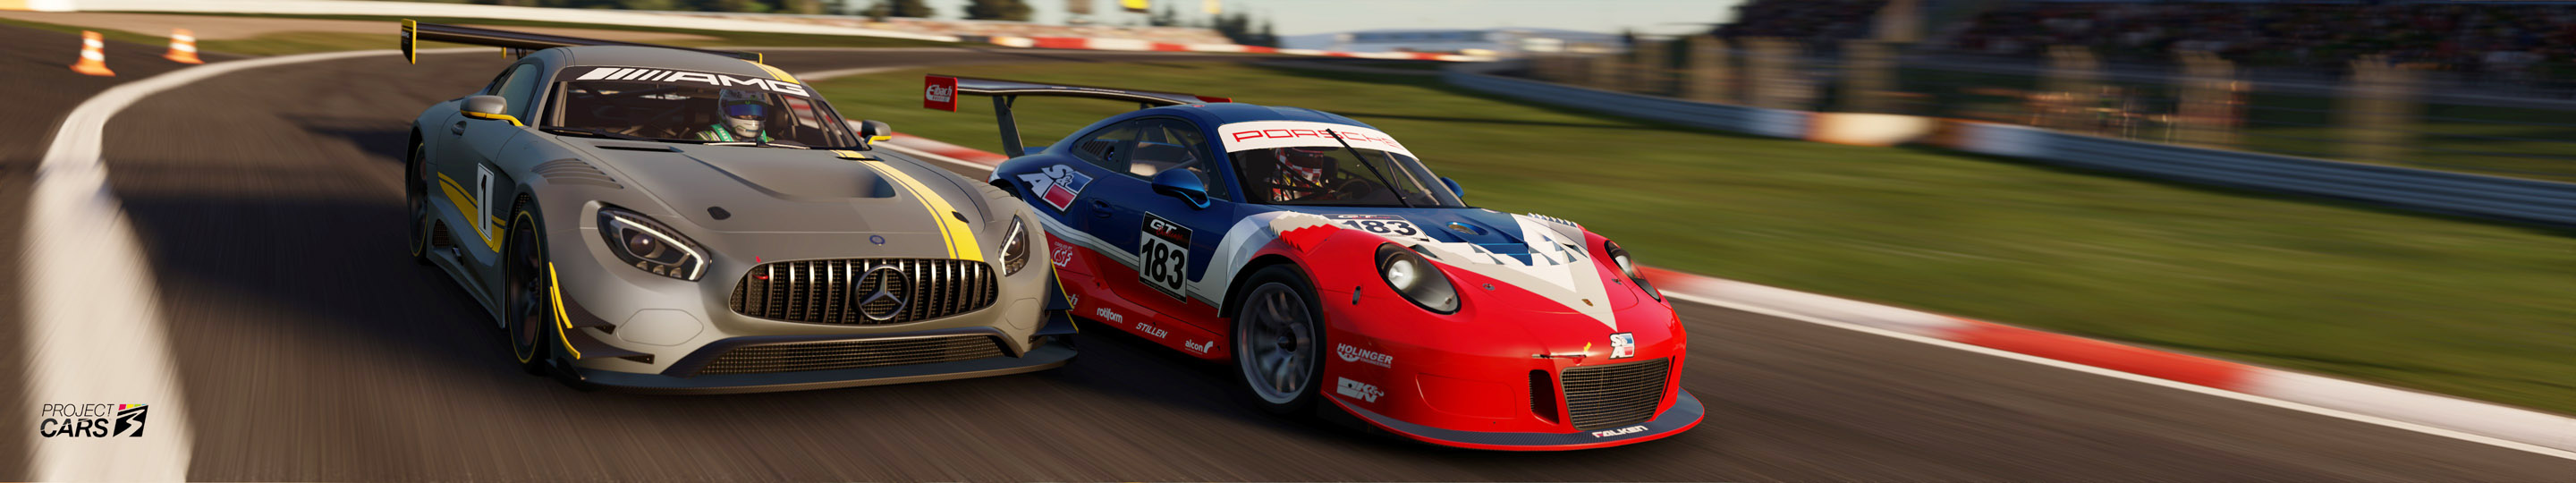 2 PROJECT CARS 3 PORSCHE 911 GT3 R at NURBURGRING copy.jpg